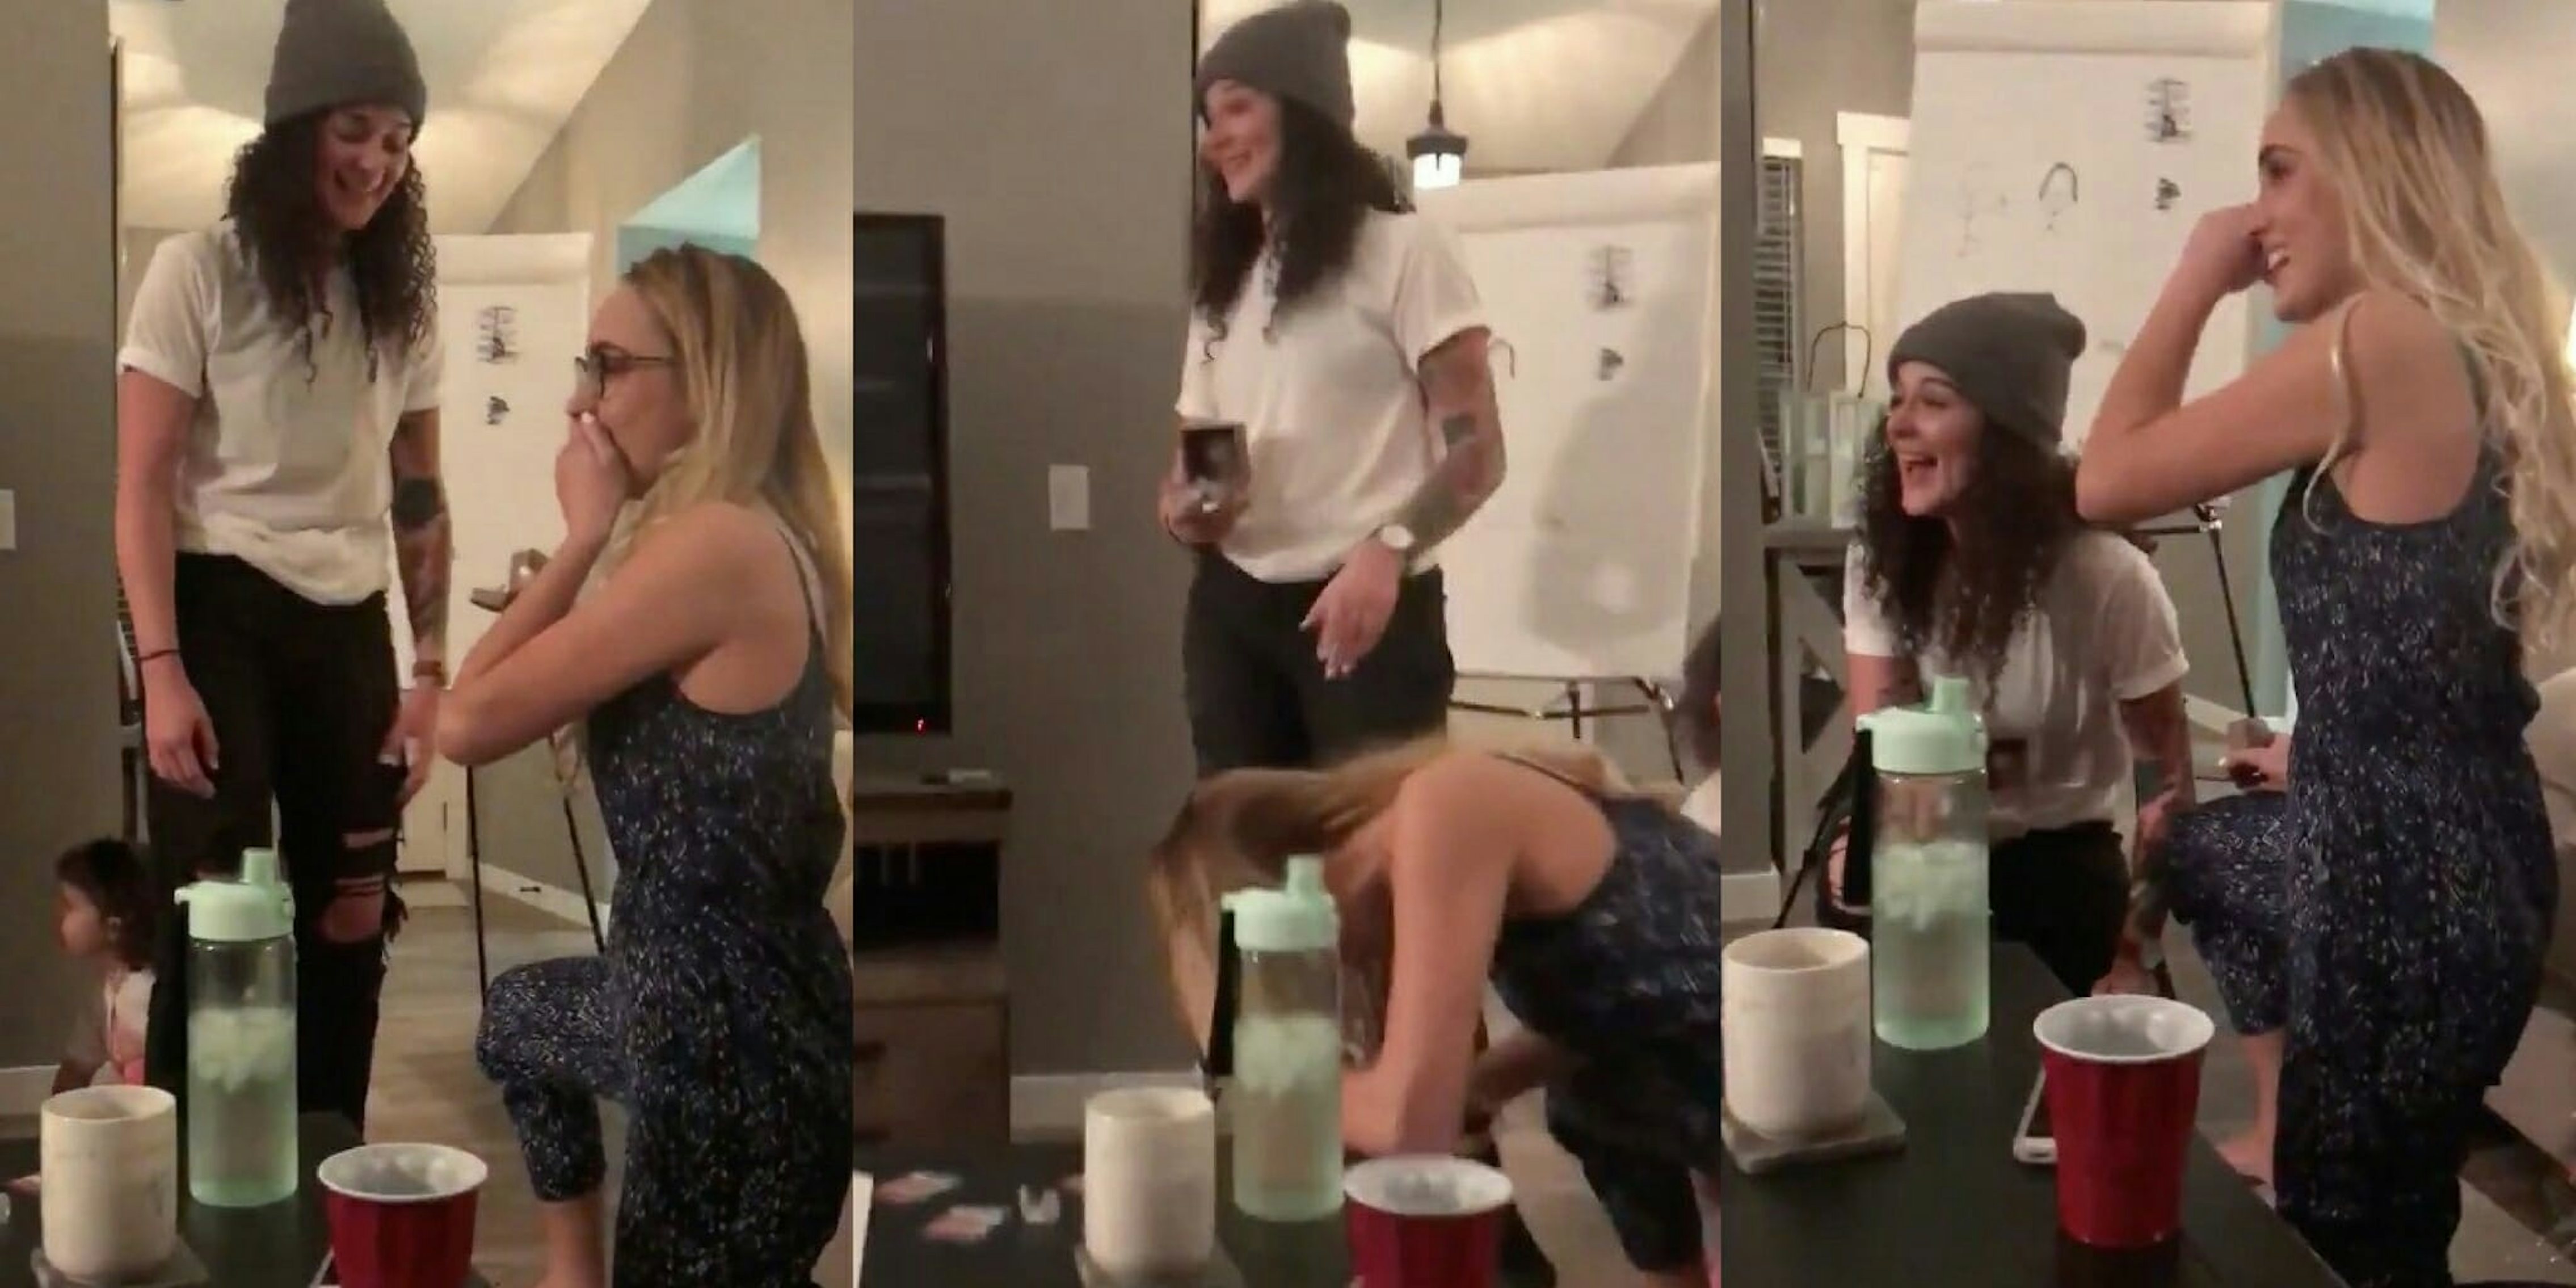 A couple accidentally planned to propose to each other during the same moment.